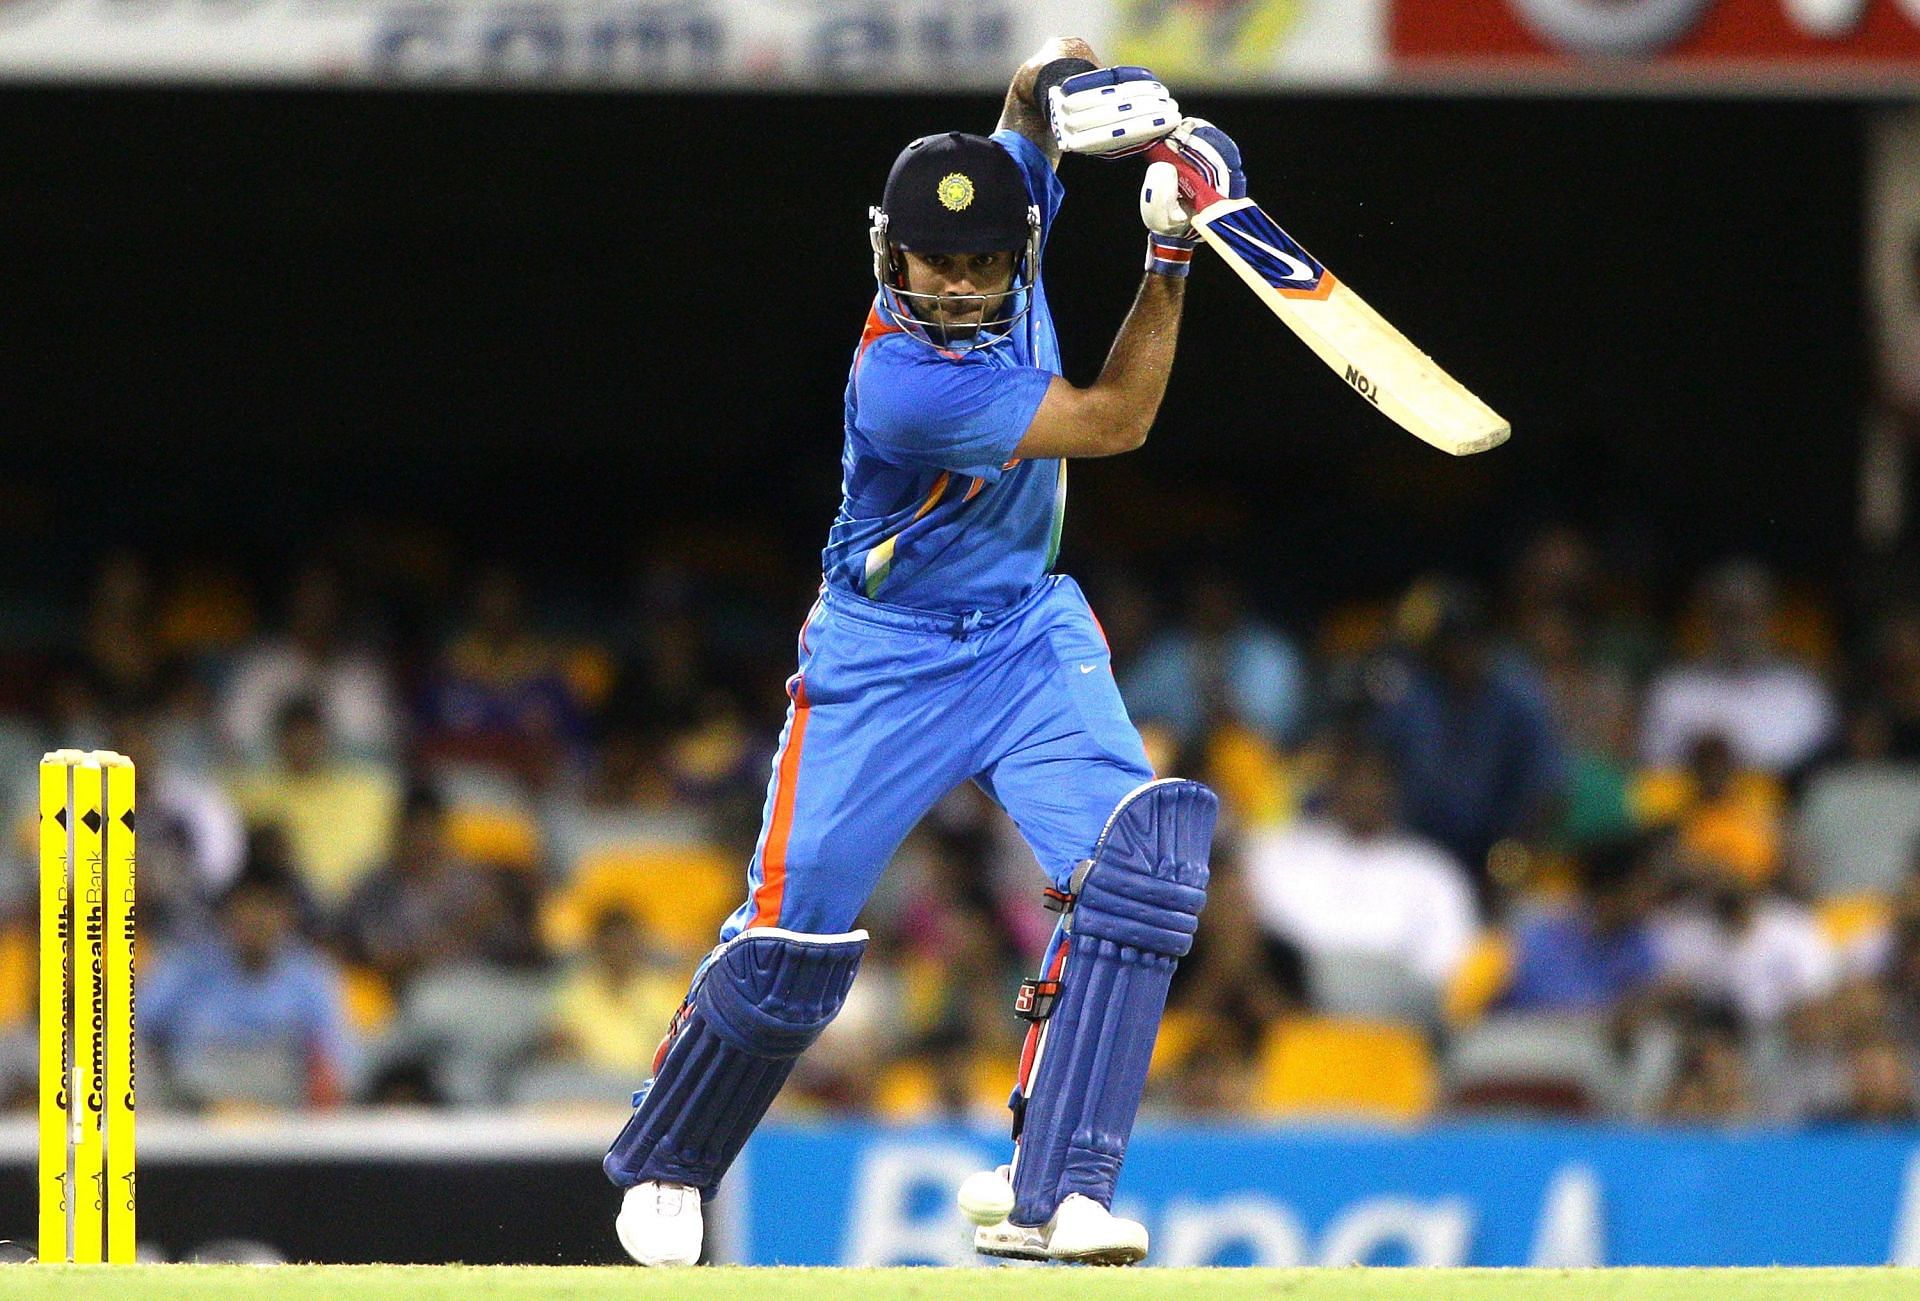 The right-handed batter averages 60 against Sri Lanka in ODIs. Pic: Getty Images